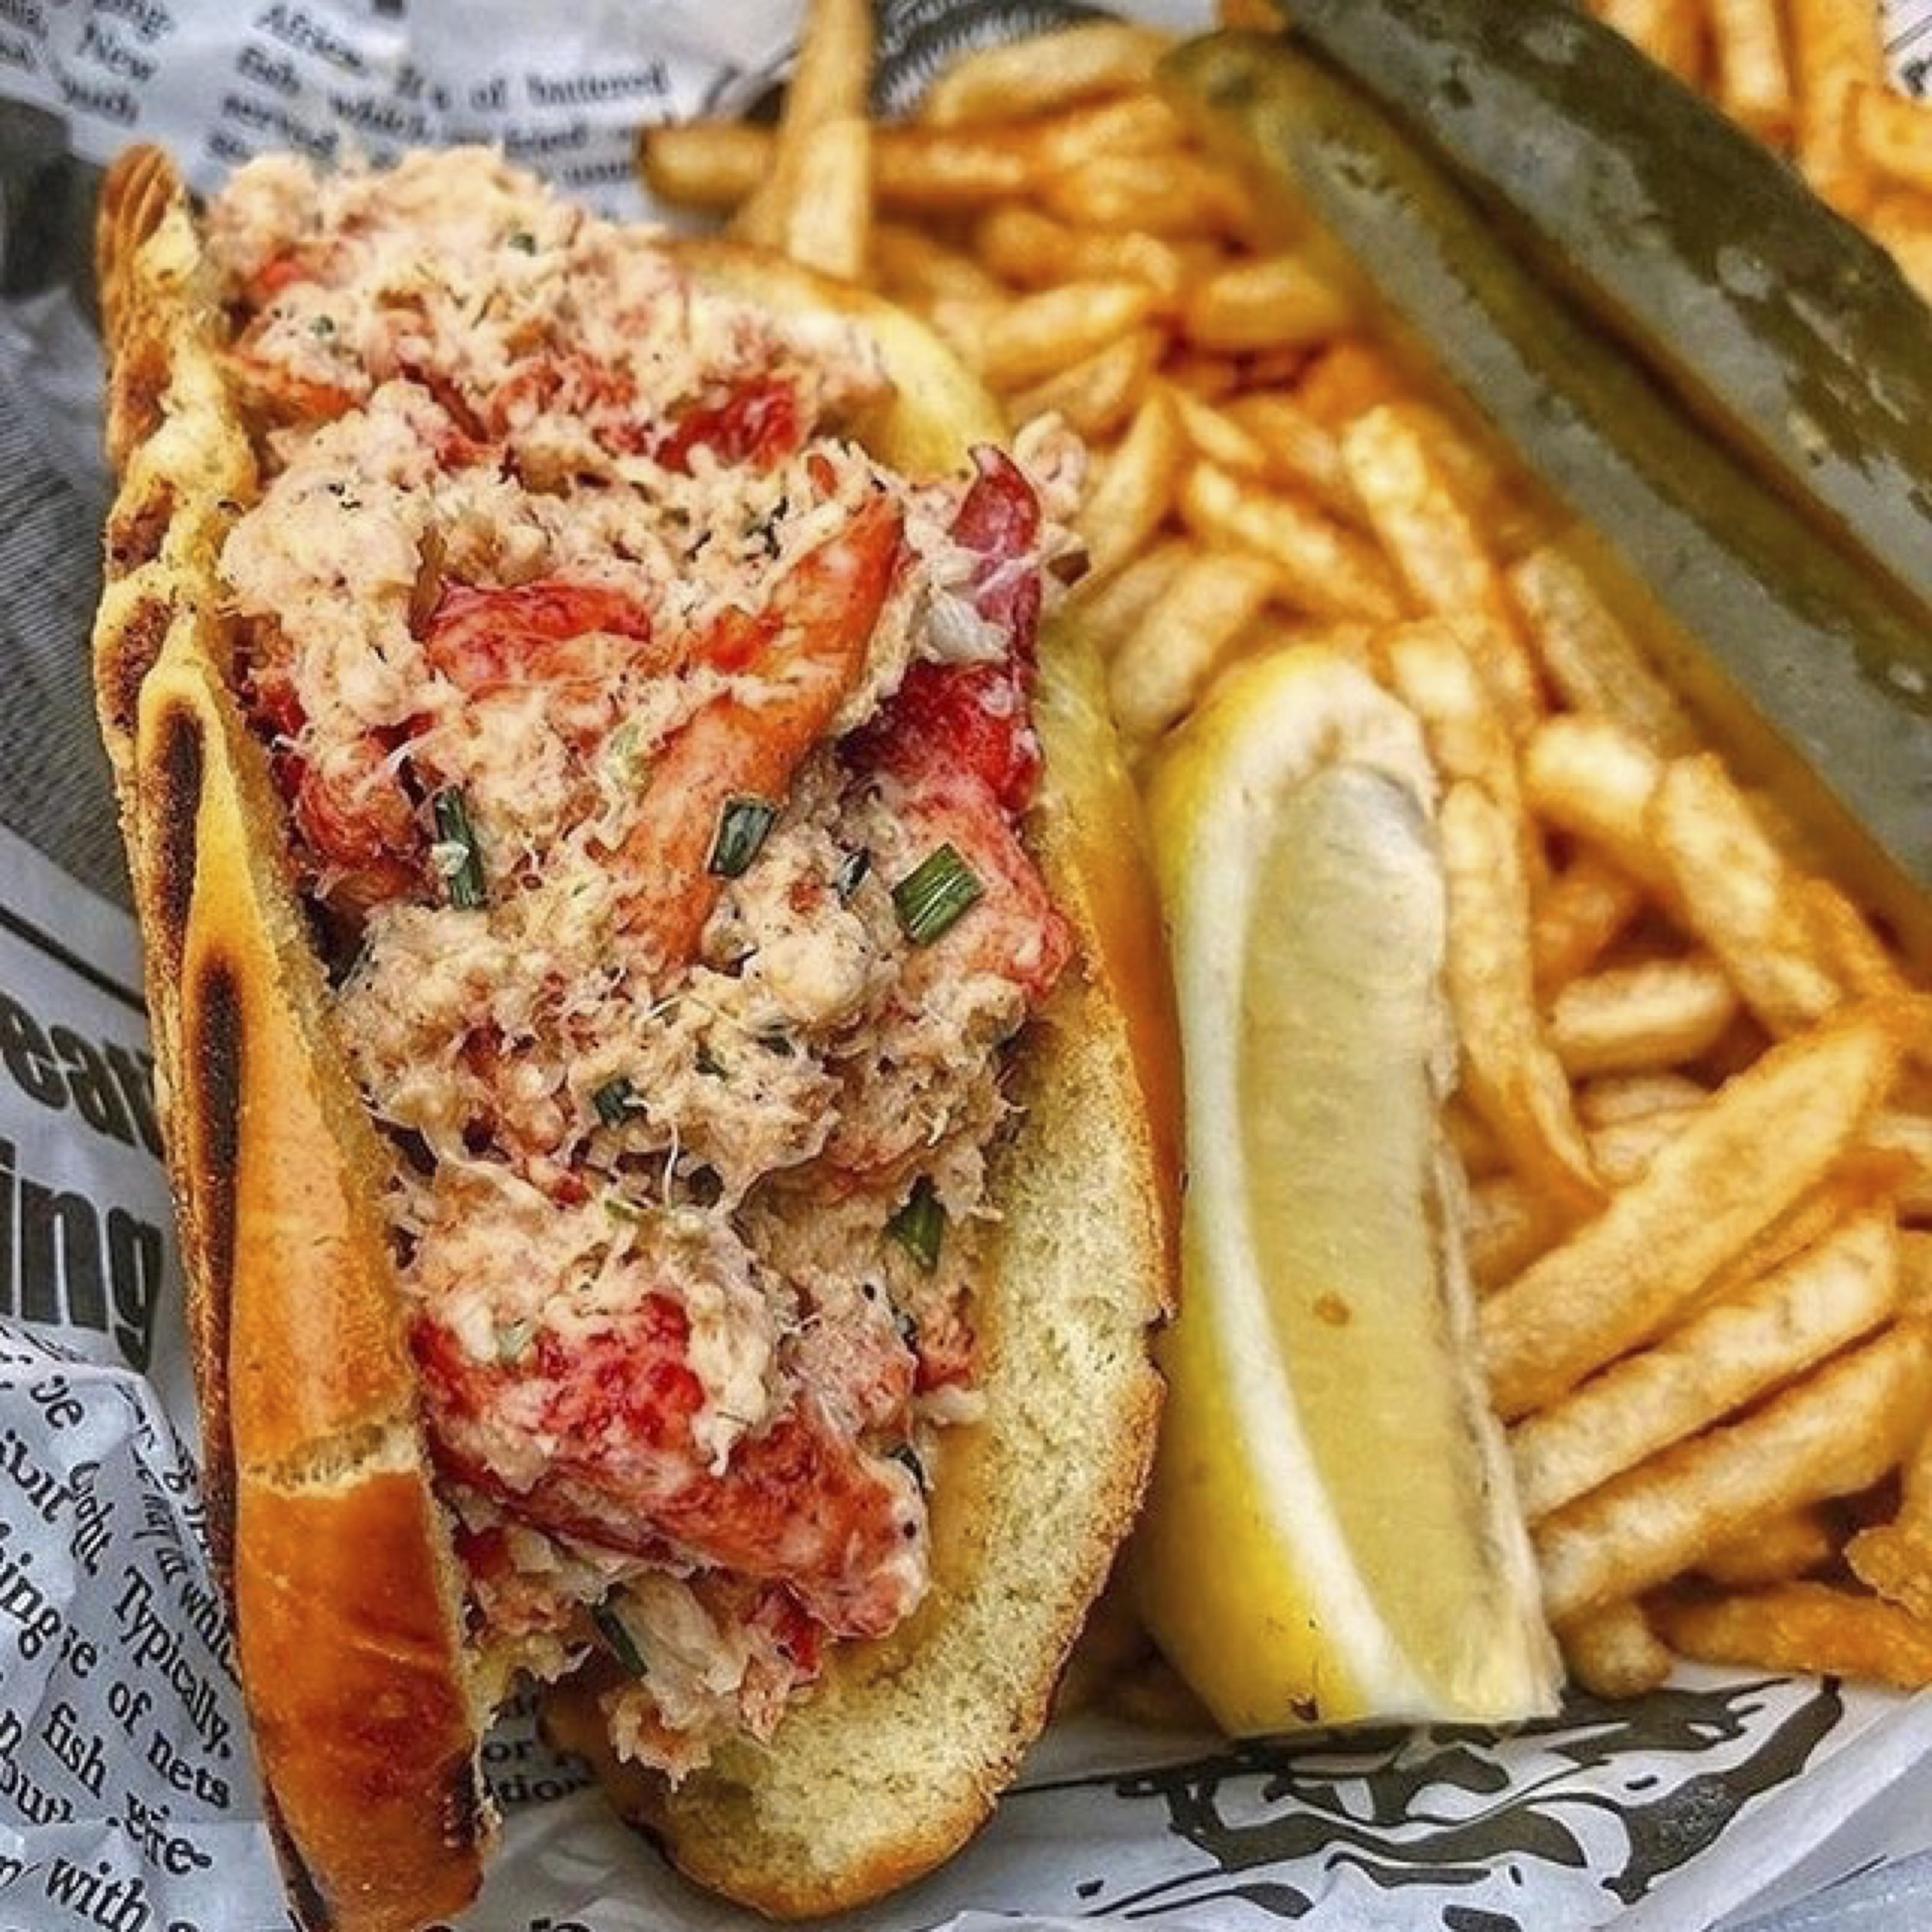 Lobster roll with fries and lemon wedge